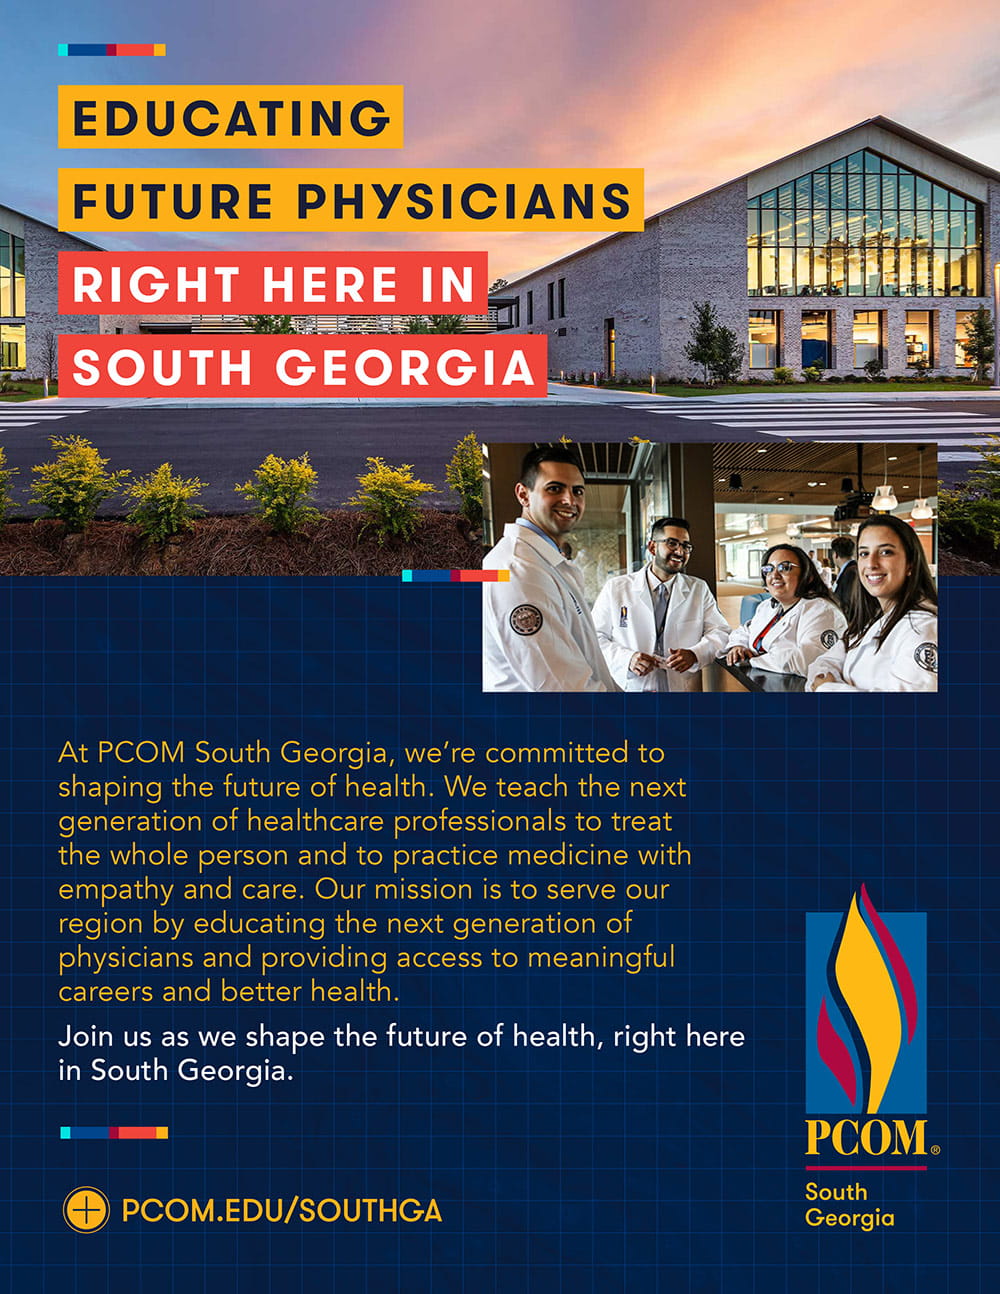 PCOM South Georgia print ad showing the front of campus, medical students smiling and the text: "Educating Future Physicians Right Here in South Georgia"